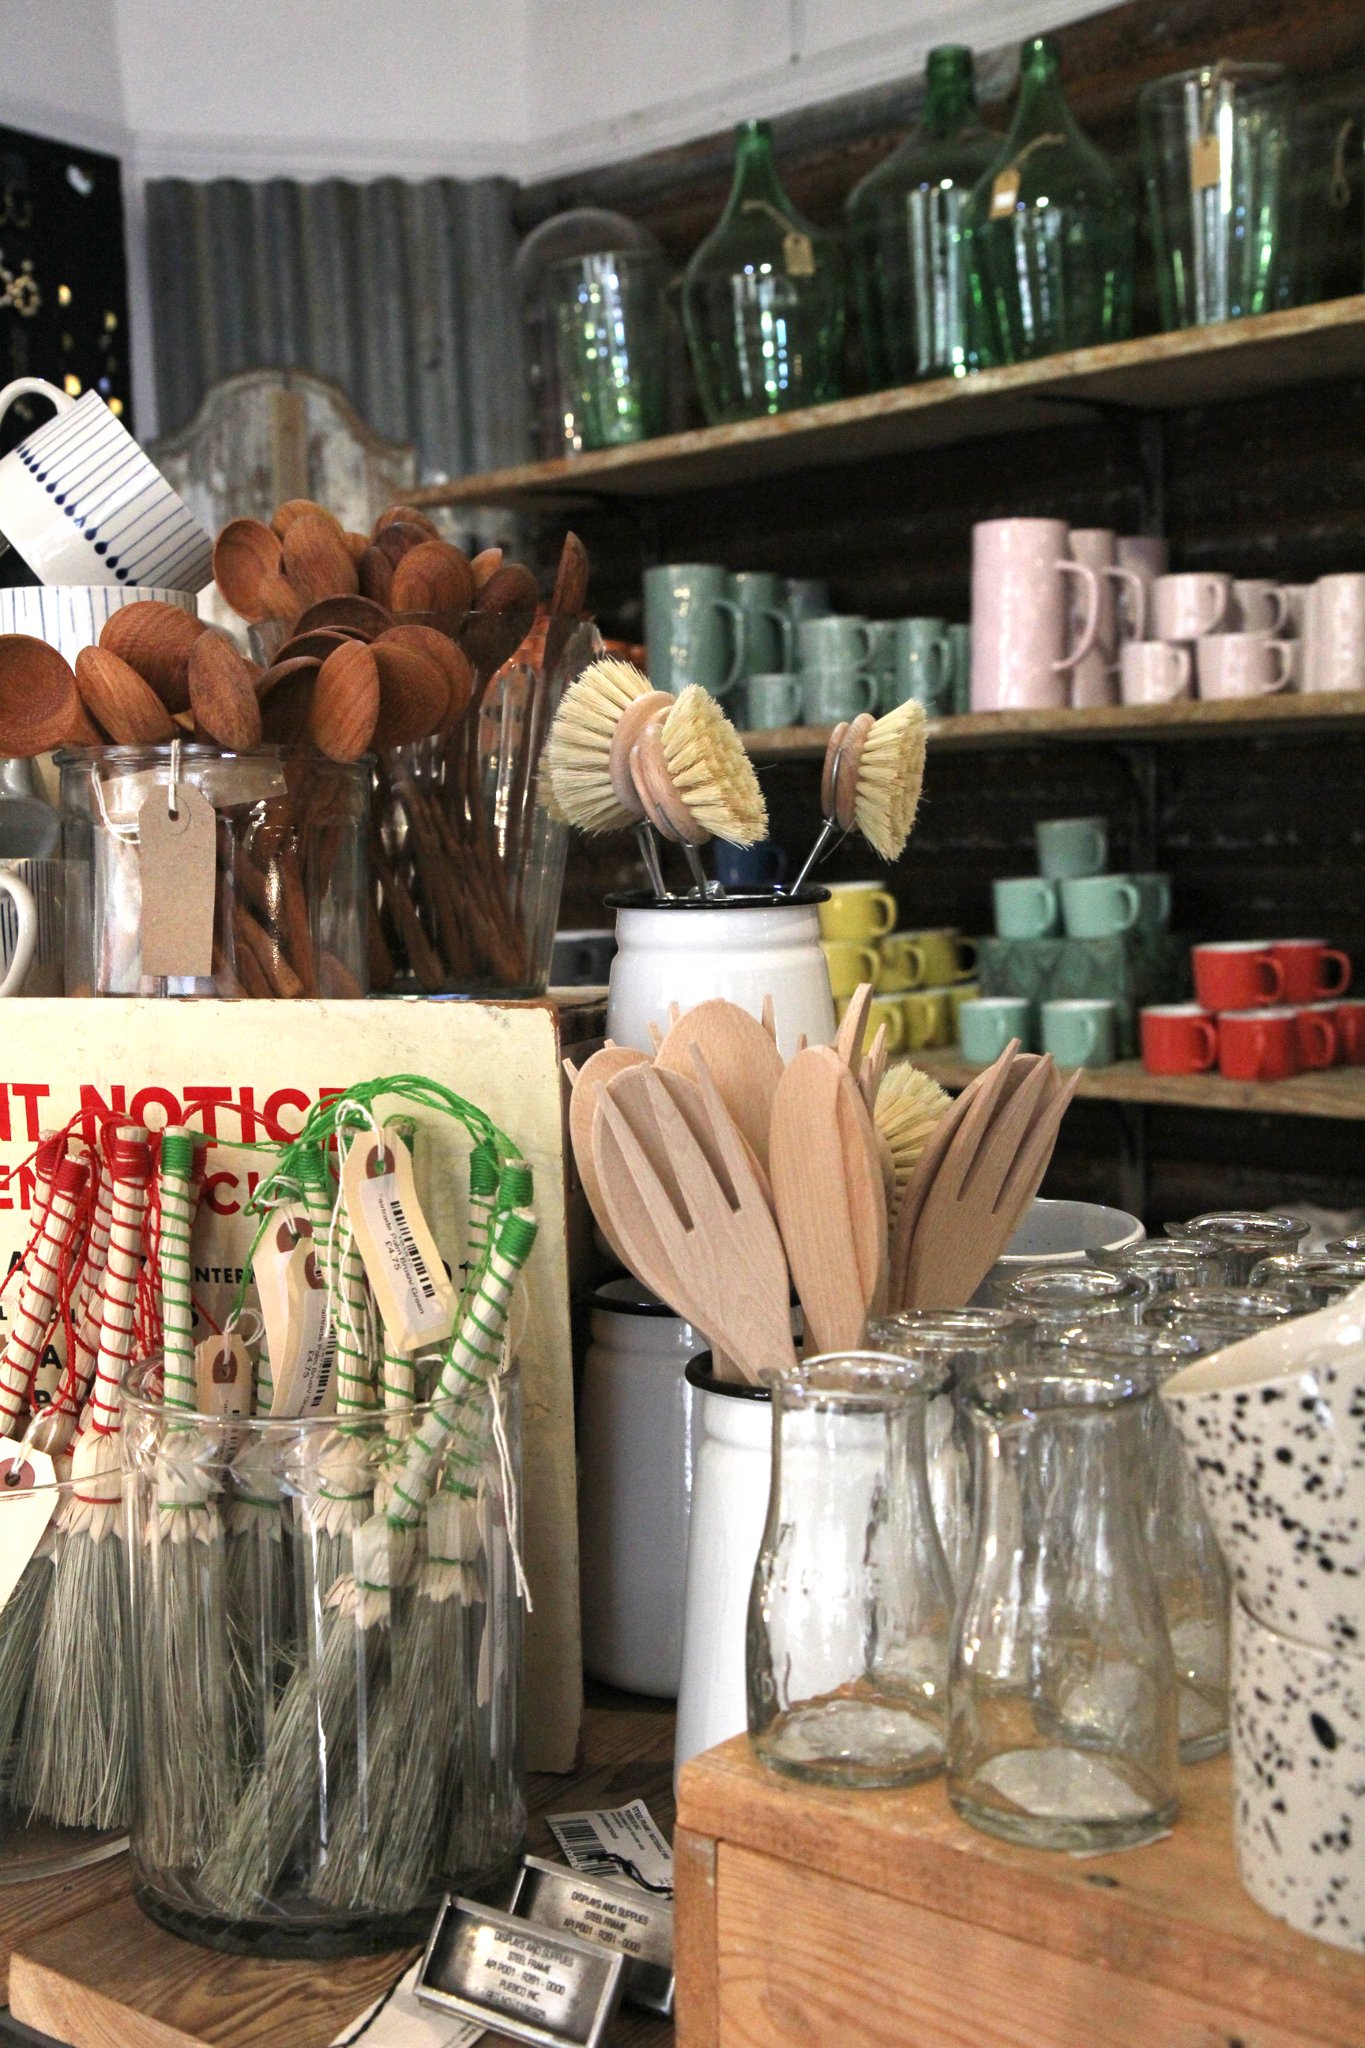 Vintage cleaning and kitchenware inside vintage interiors store Domestic Science